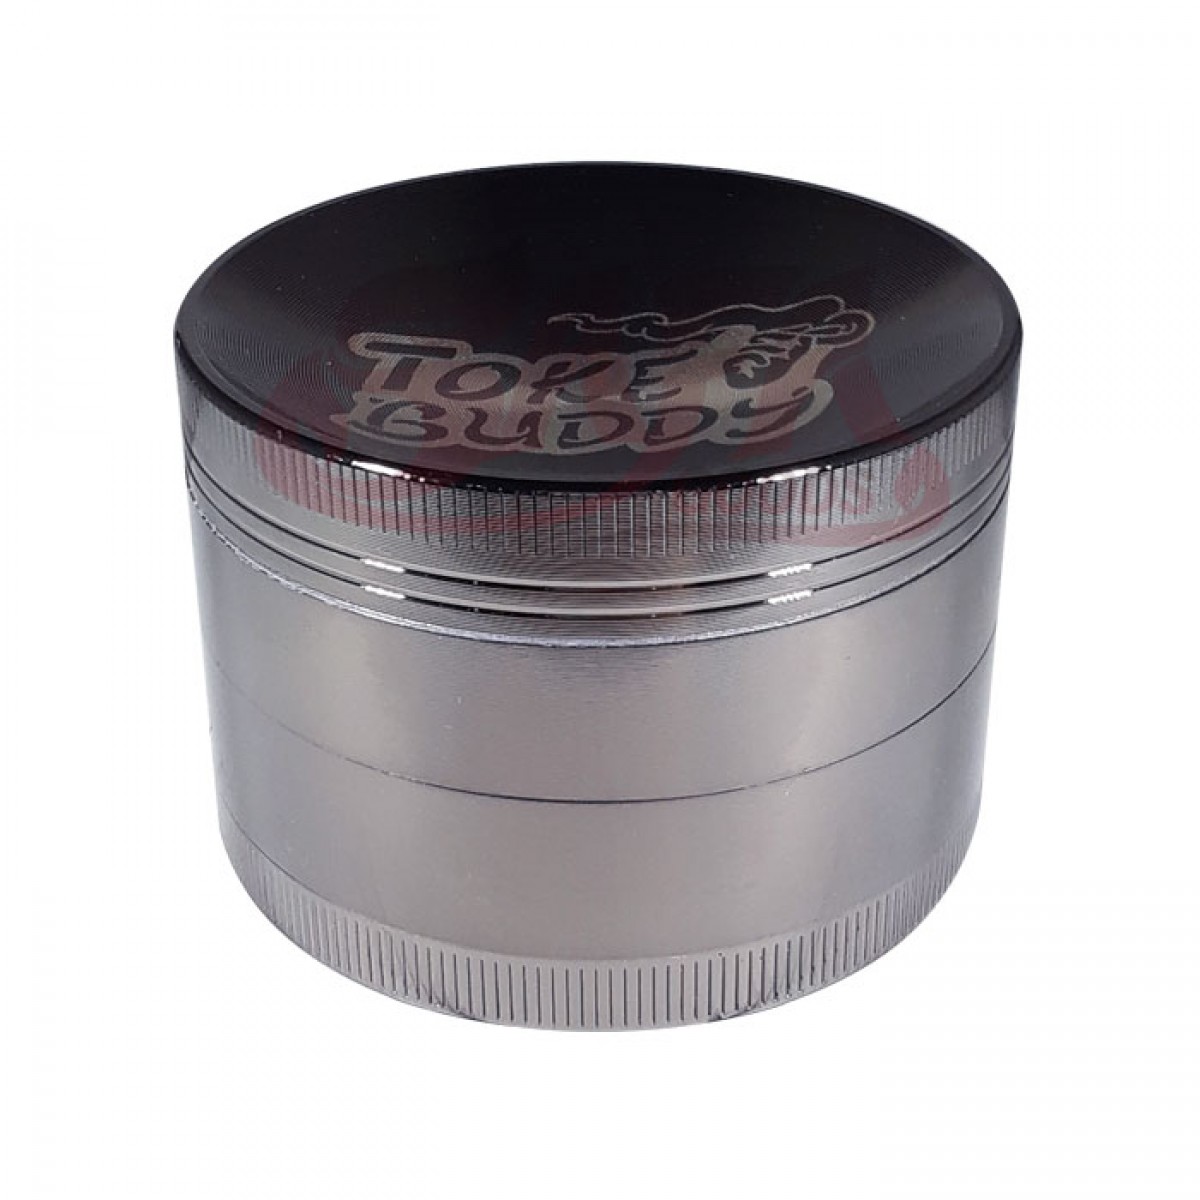 Jay's Toke Buddy Grinders 63mm Concave 